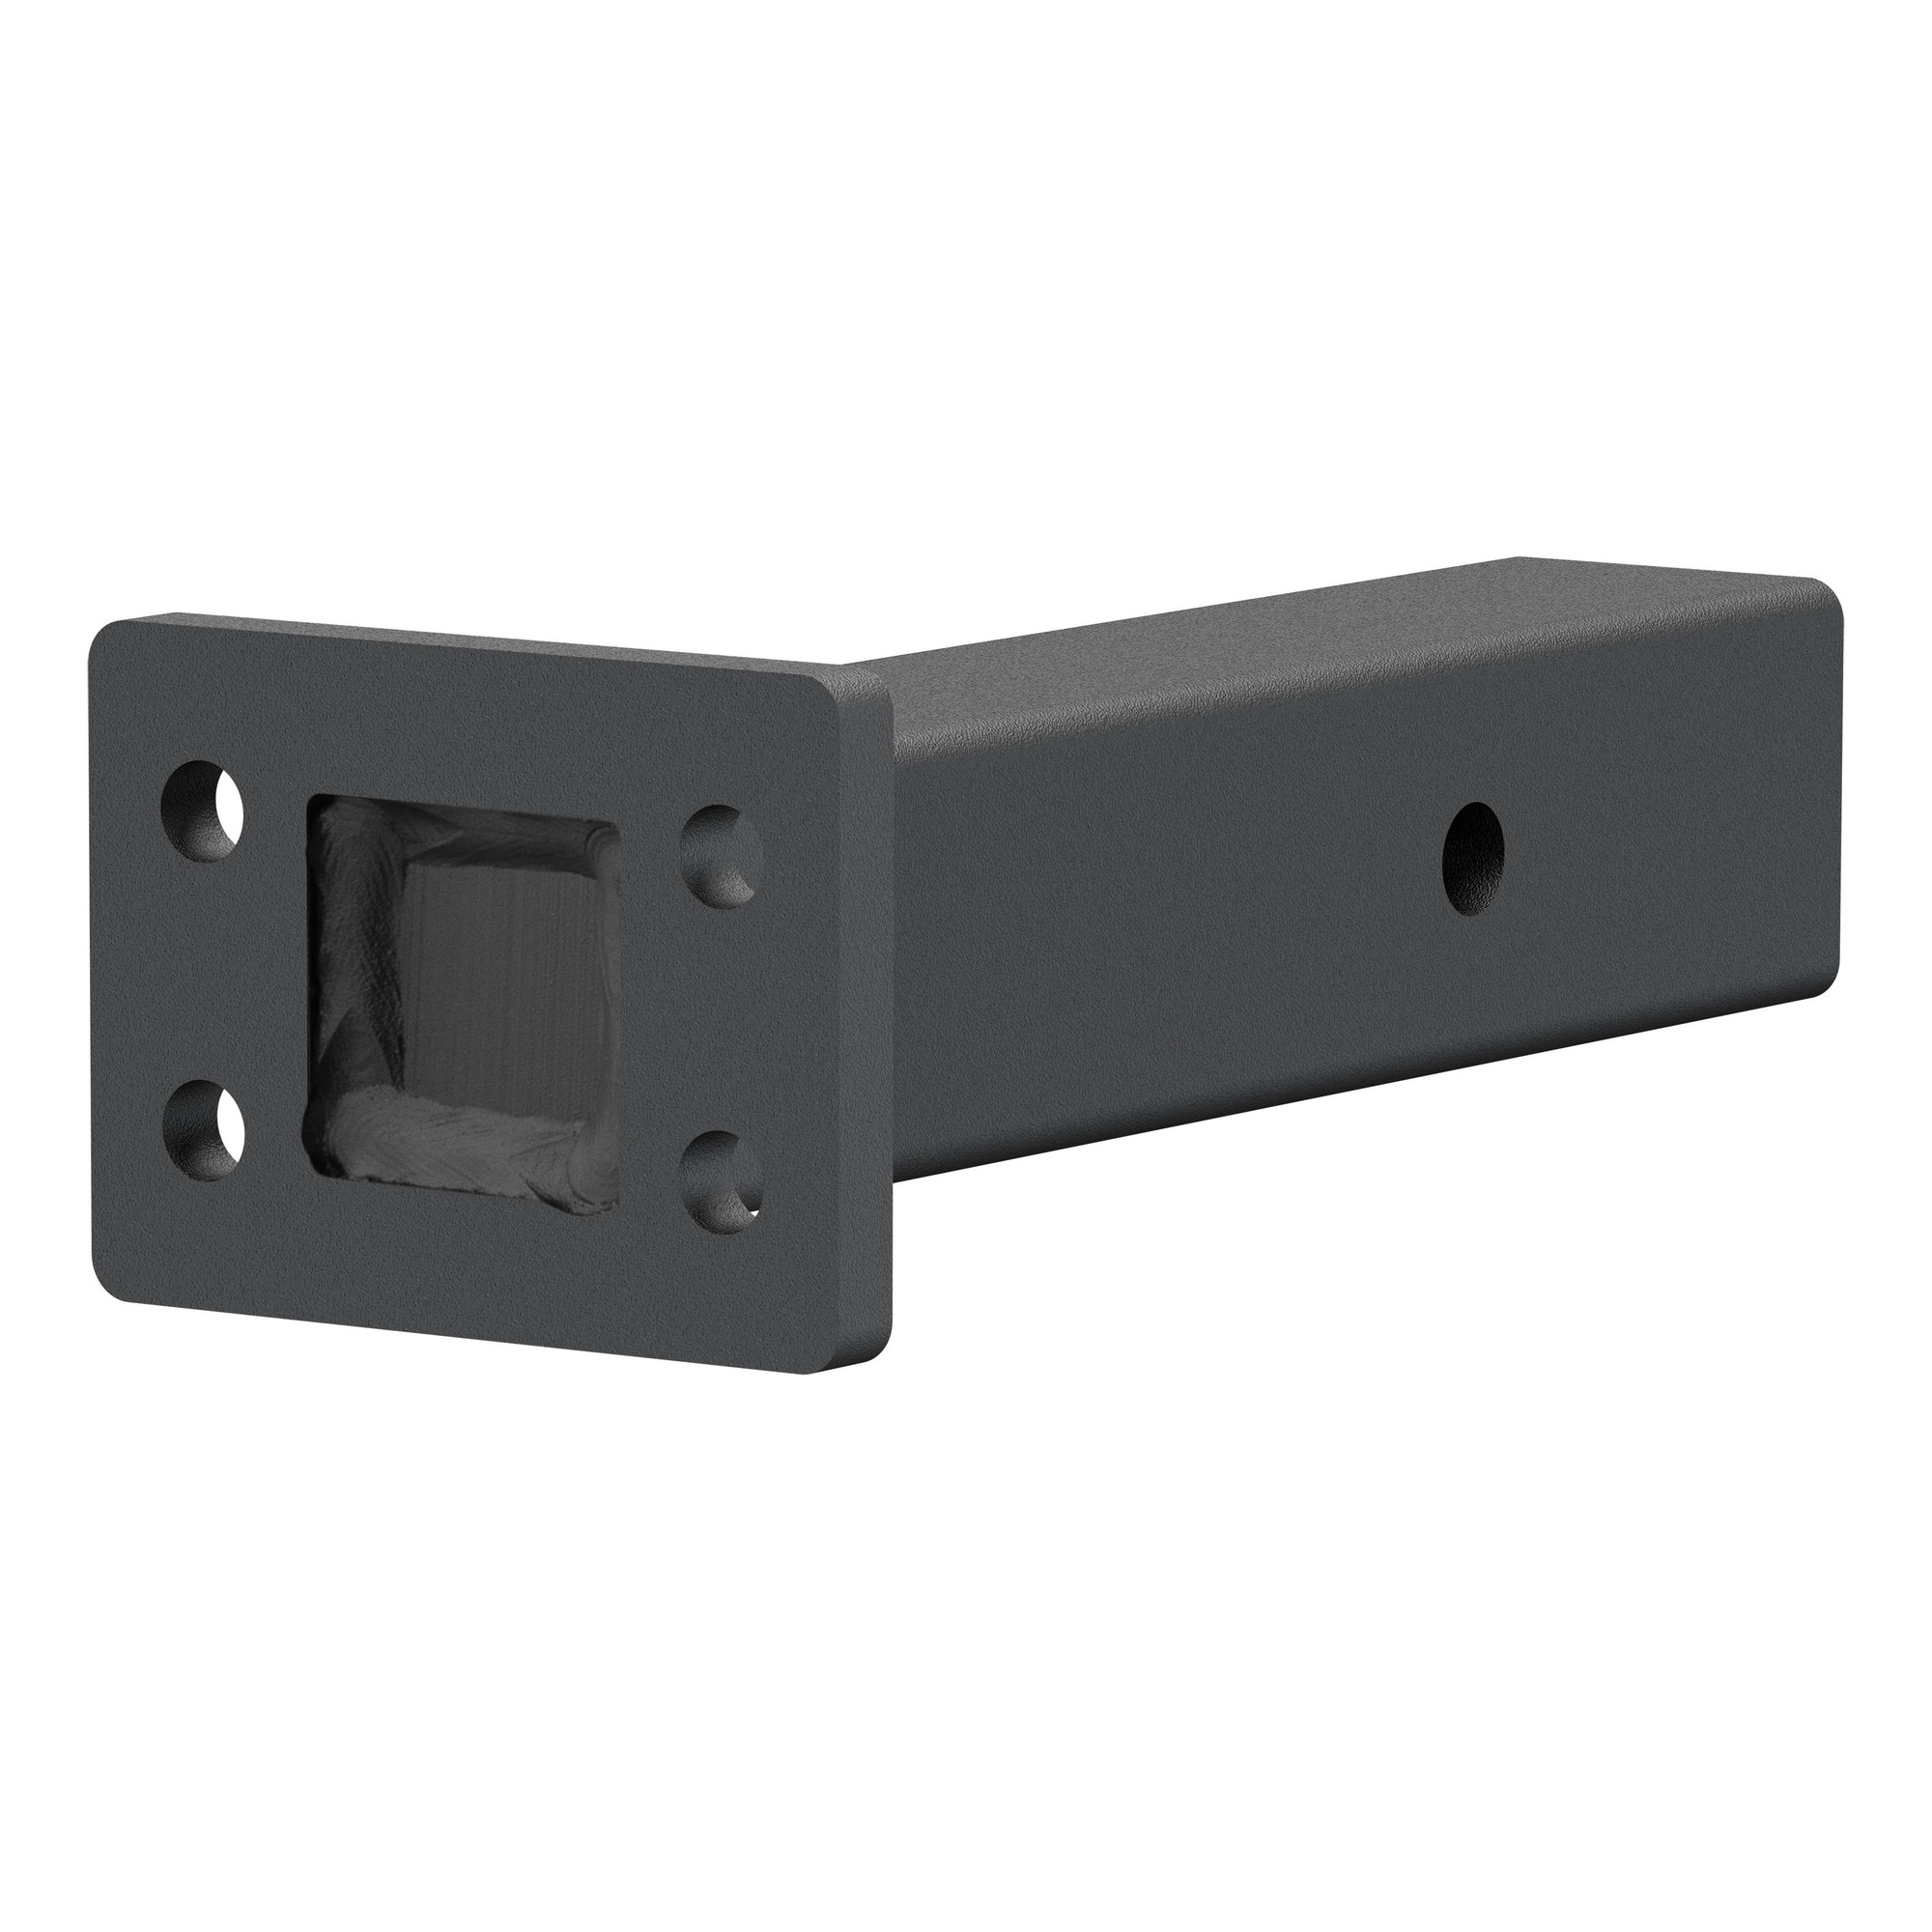 Curt Manufacturing Trailer Hitch Pintle Mount, 2.5x8Inch Receiver, Solid Steel, 20,000lb. Capacity, Model 48340